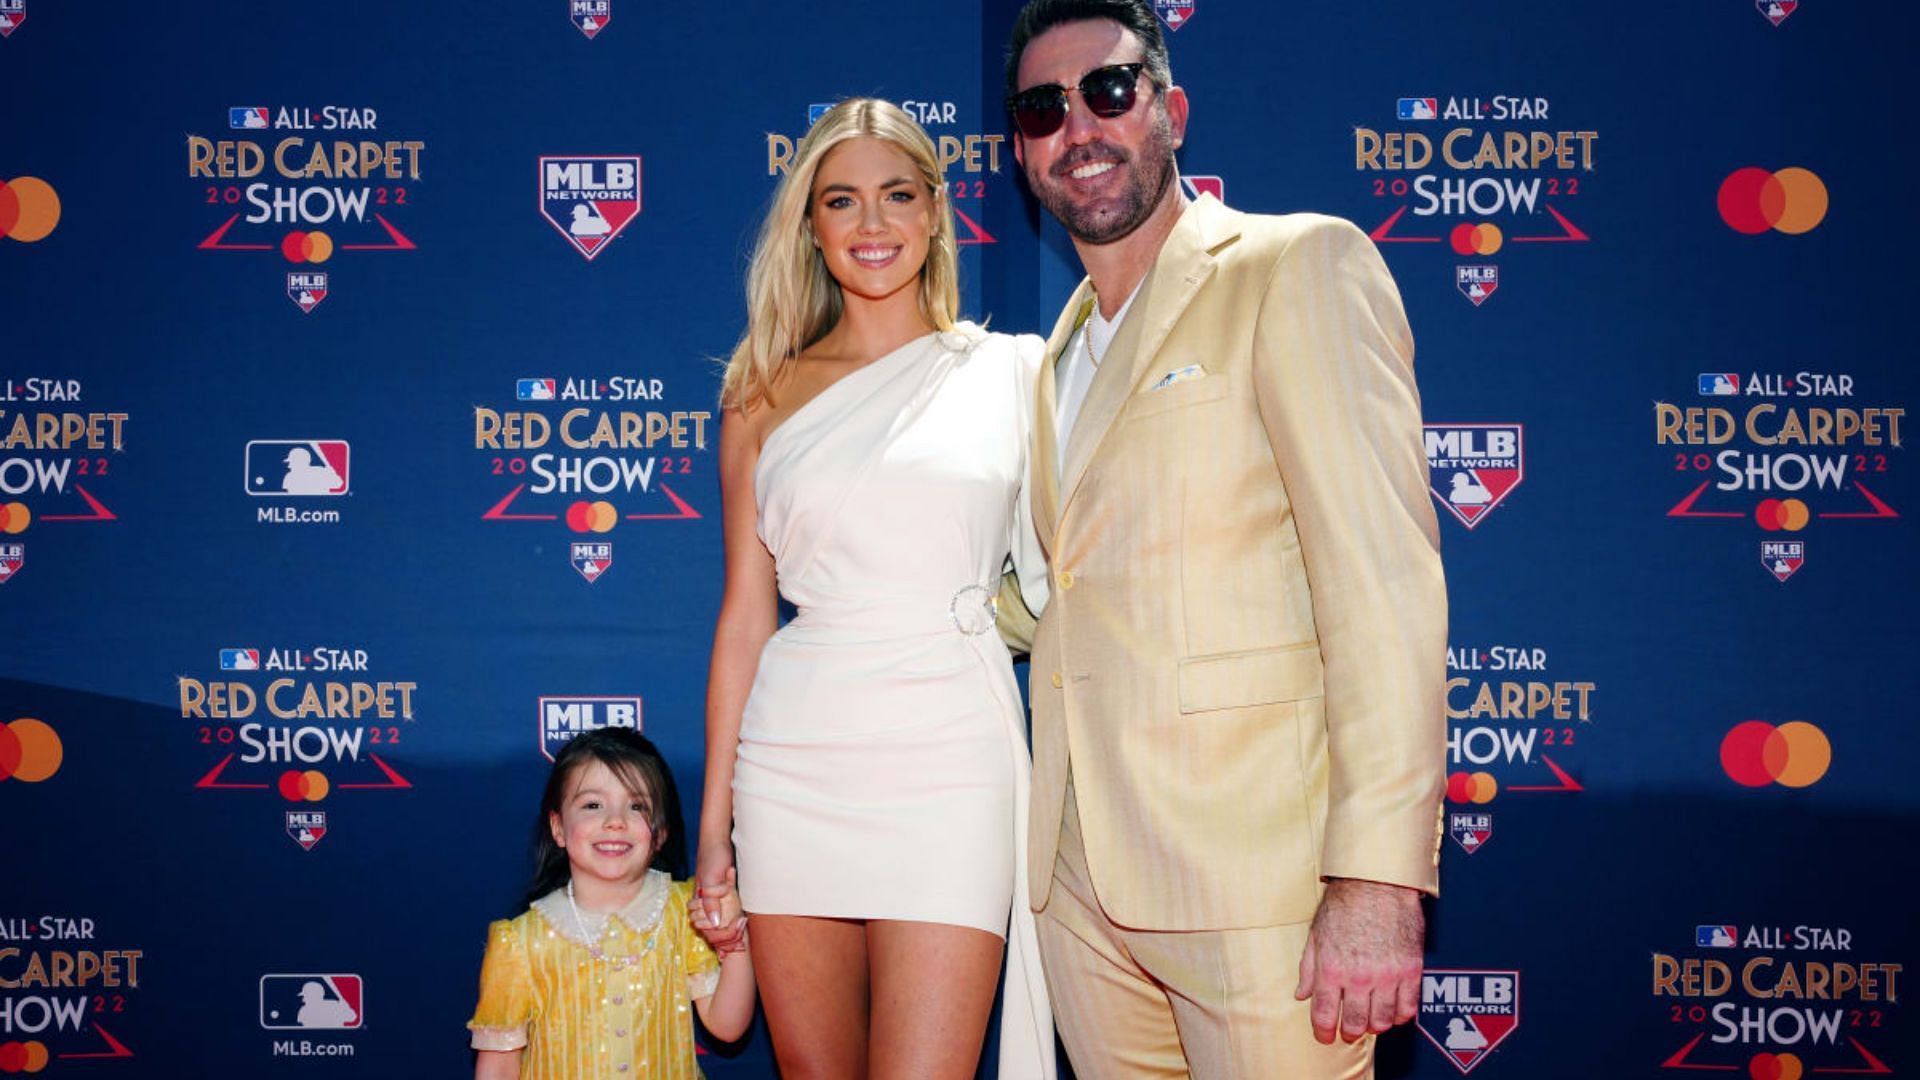 Meet the beautiful WAGs of the Yankees ahead of the ALDS 2022